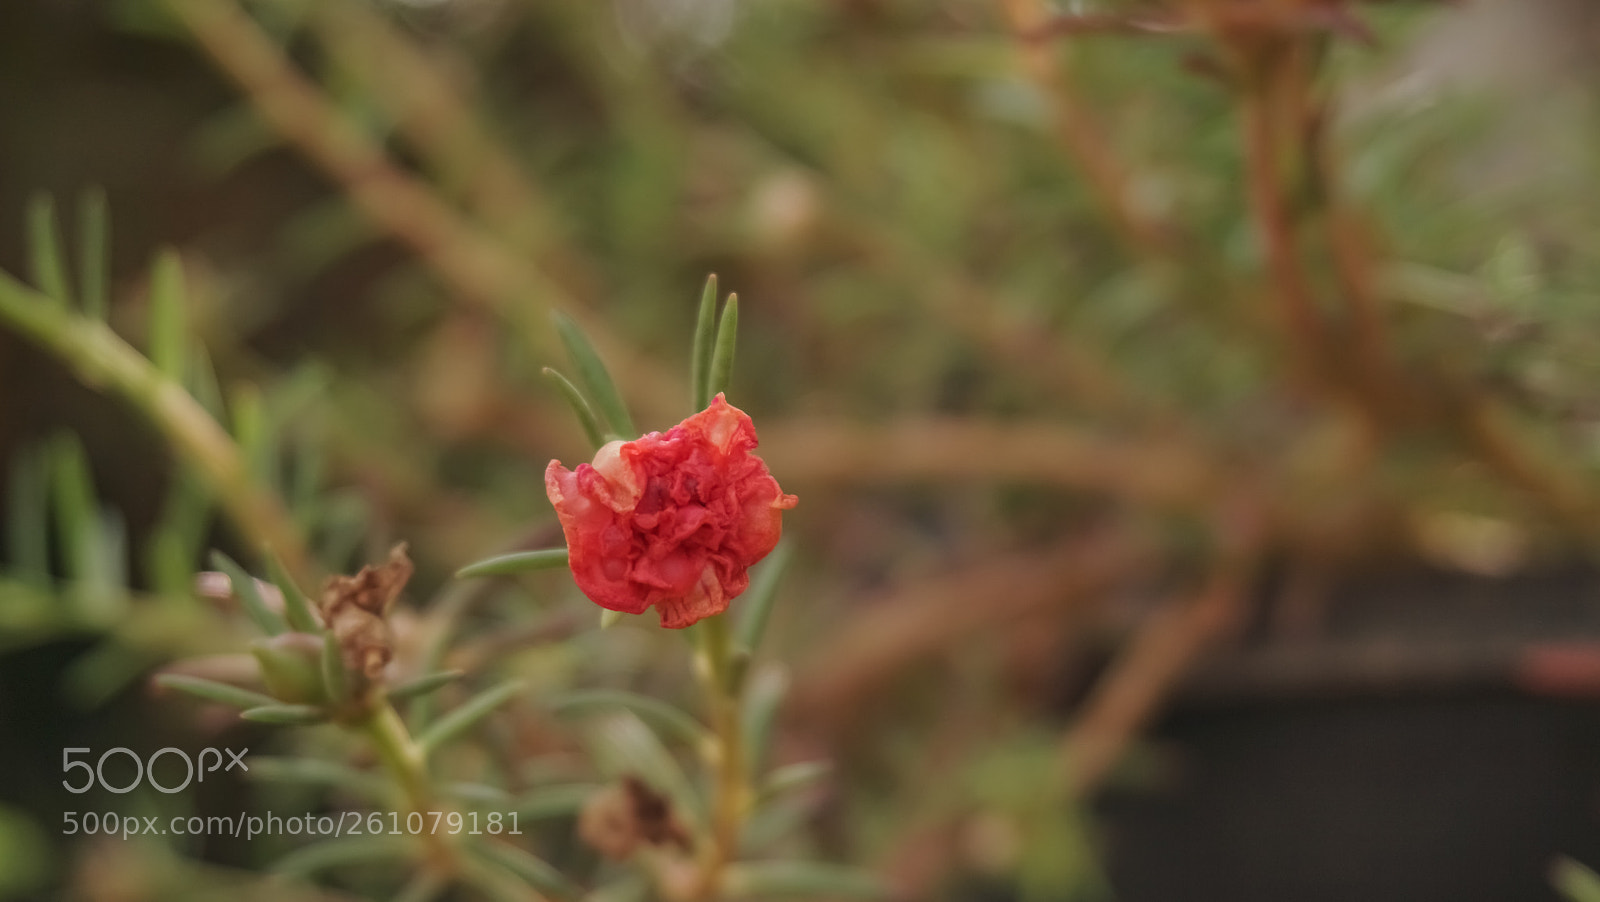 Sony a6000 sample photo. Beautiful image of natural photography